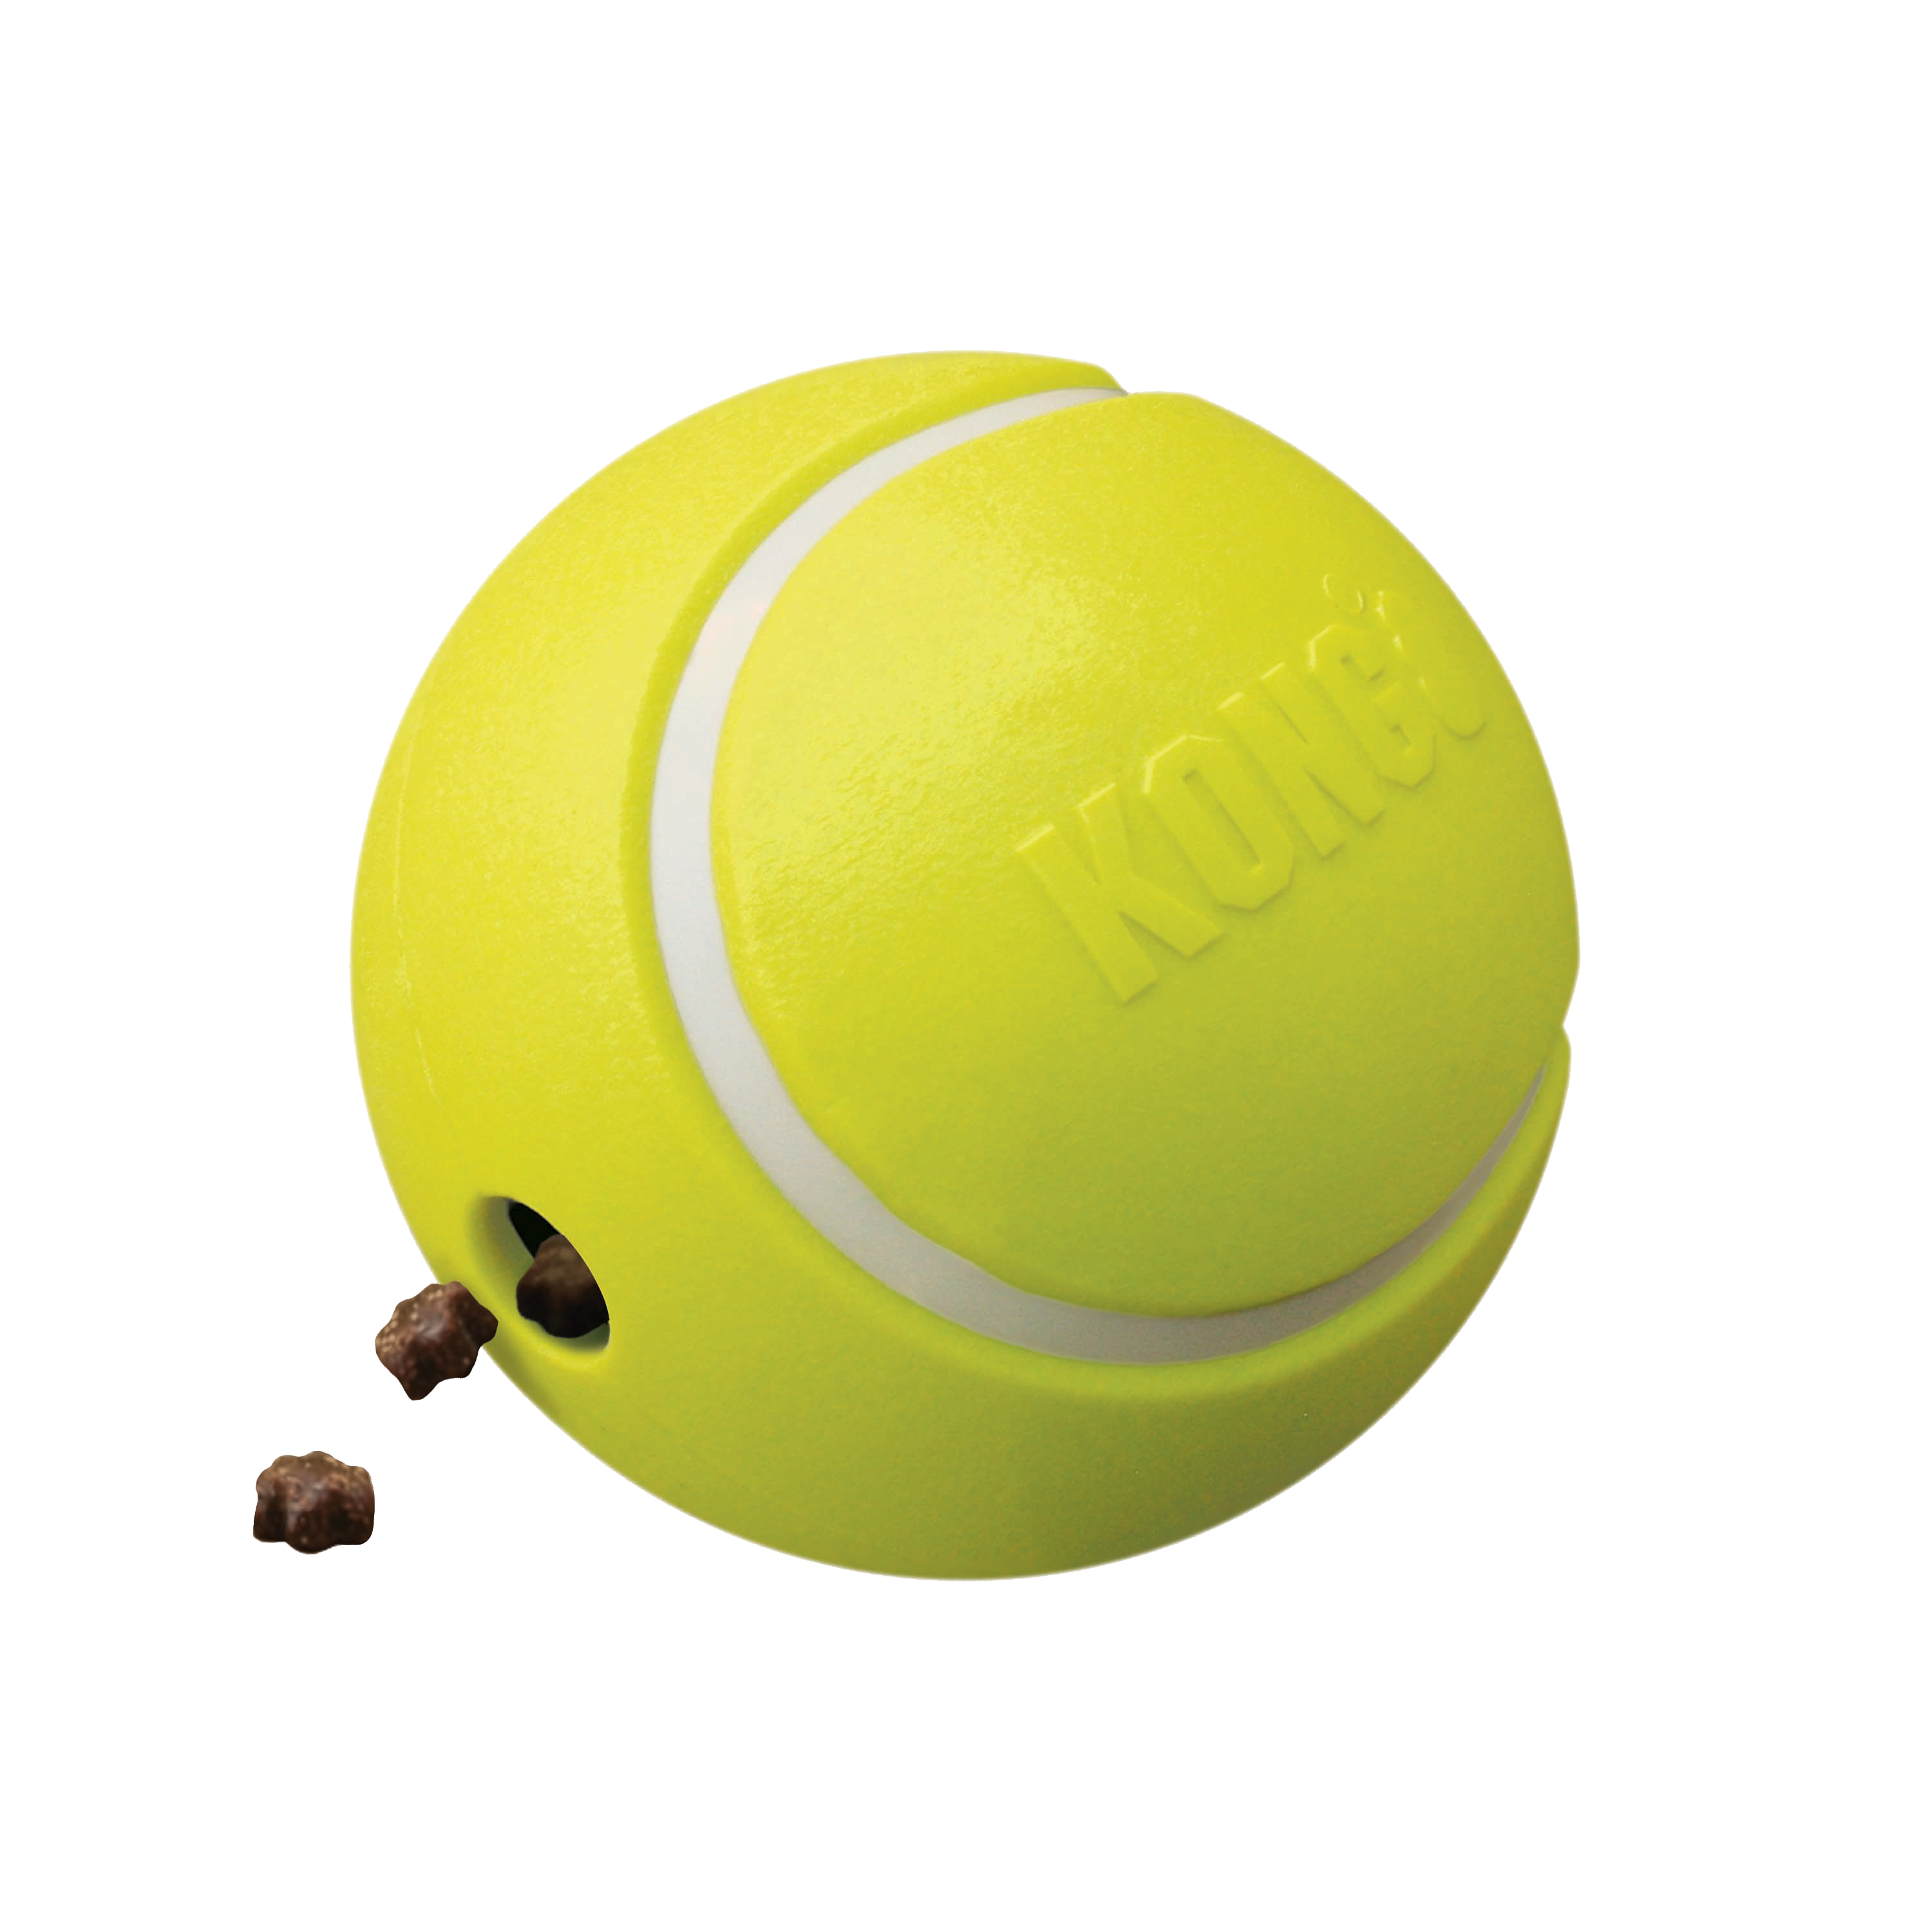 Rewards Tennis offpack product image